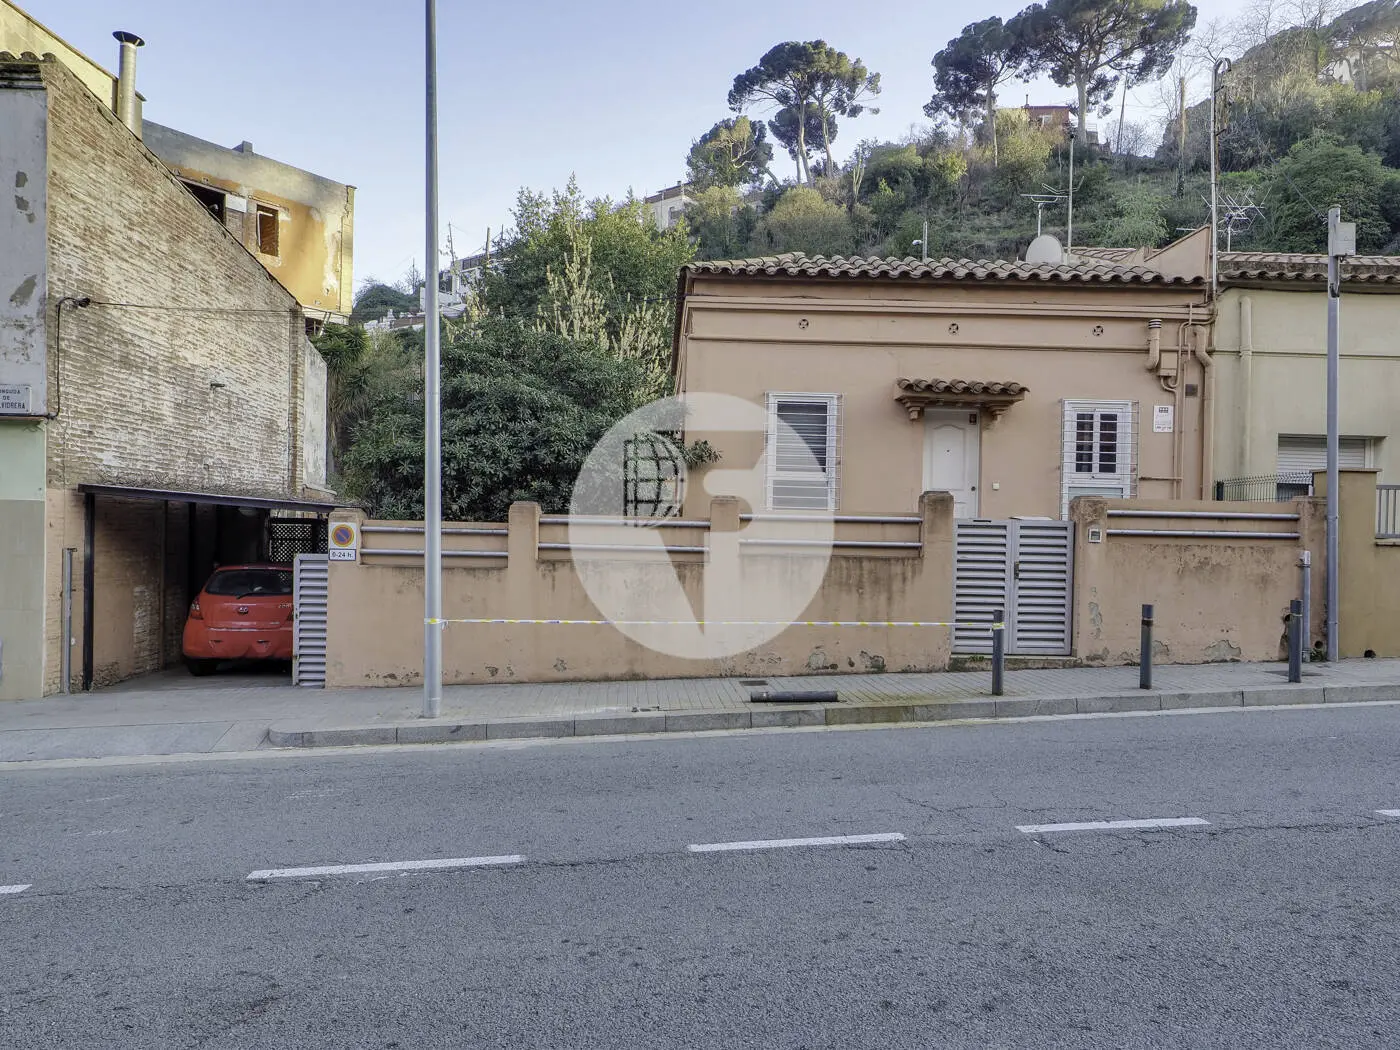 Fantastic 185m² house with garden and terrace in the Sarrià neighborhood of Barcelona 52